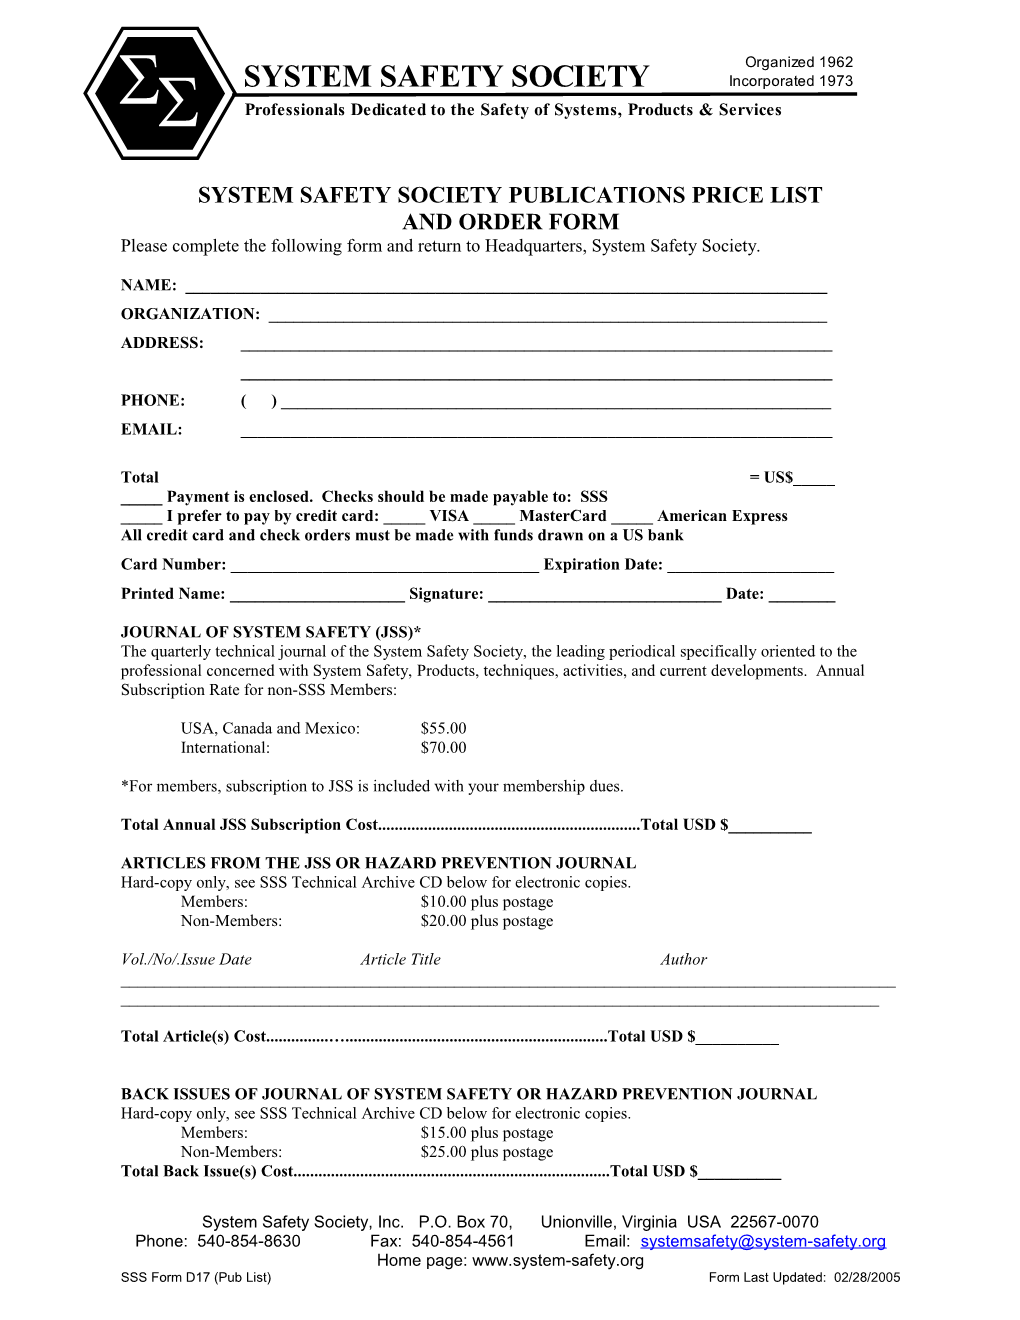 System Safety Society Publications and Price List Order Form